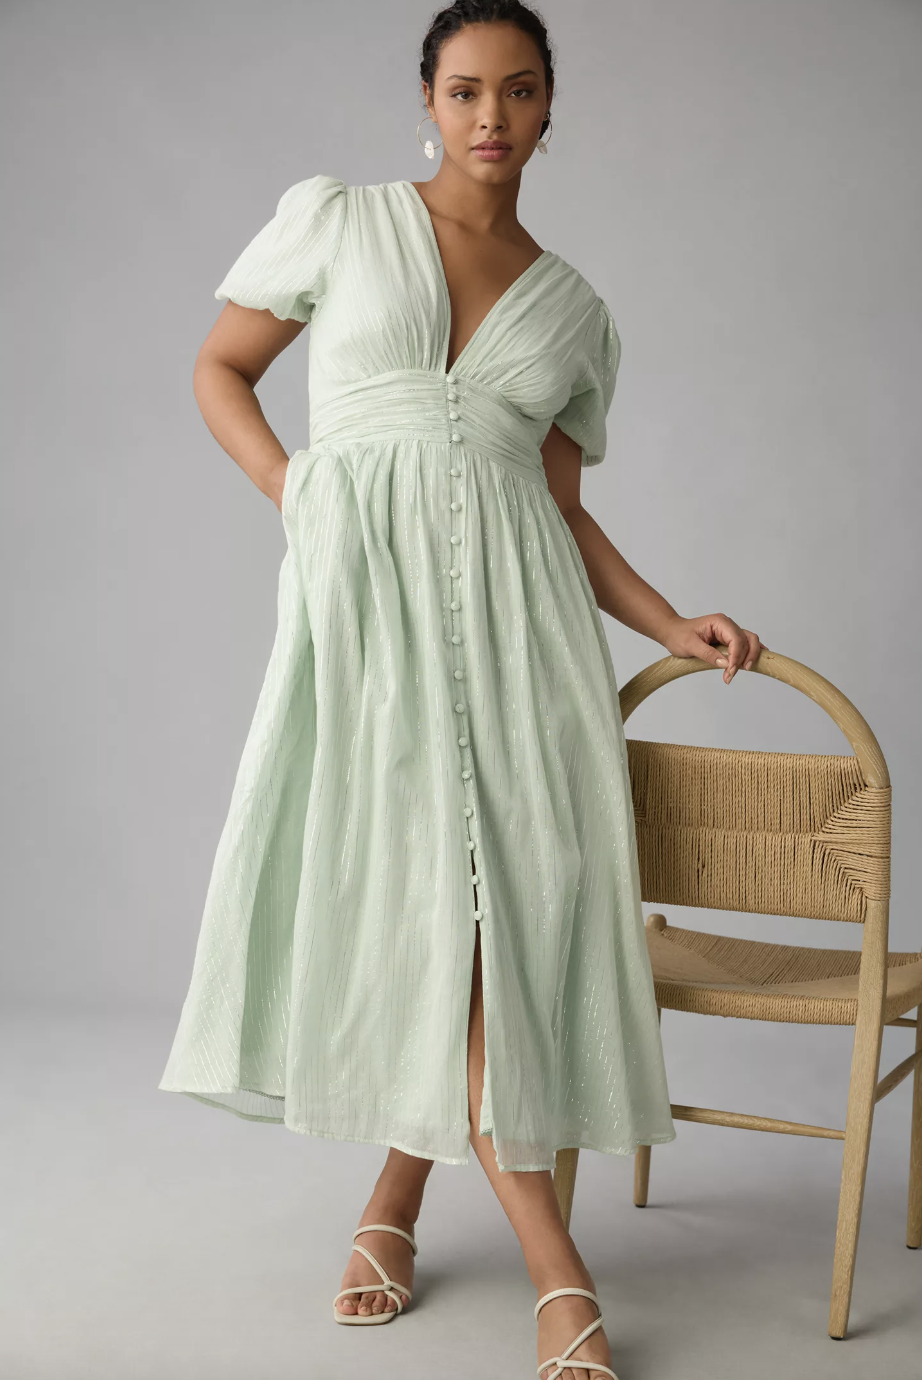 model leaning on chair in light green wedding guest dress, The Catalina Lurex Button-Front Dress (photo via Anthropologie)